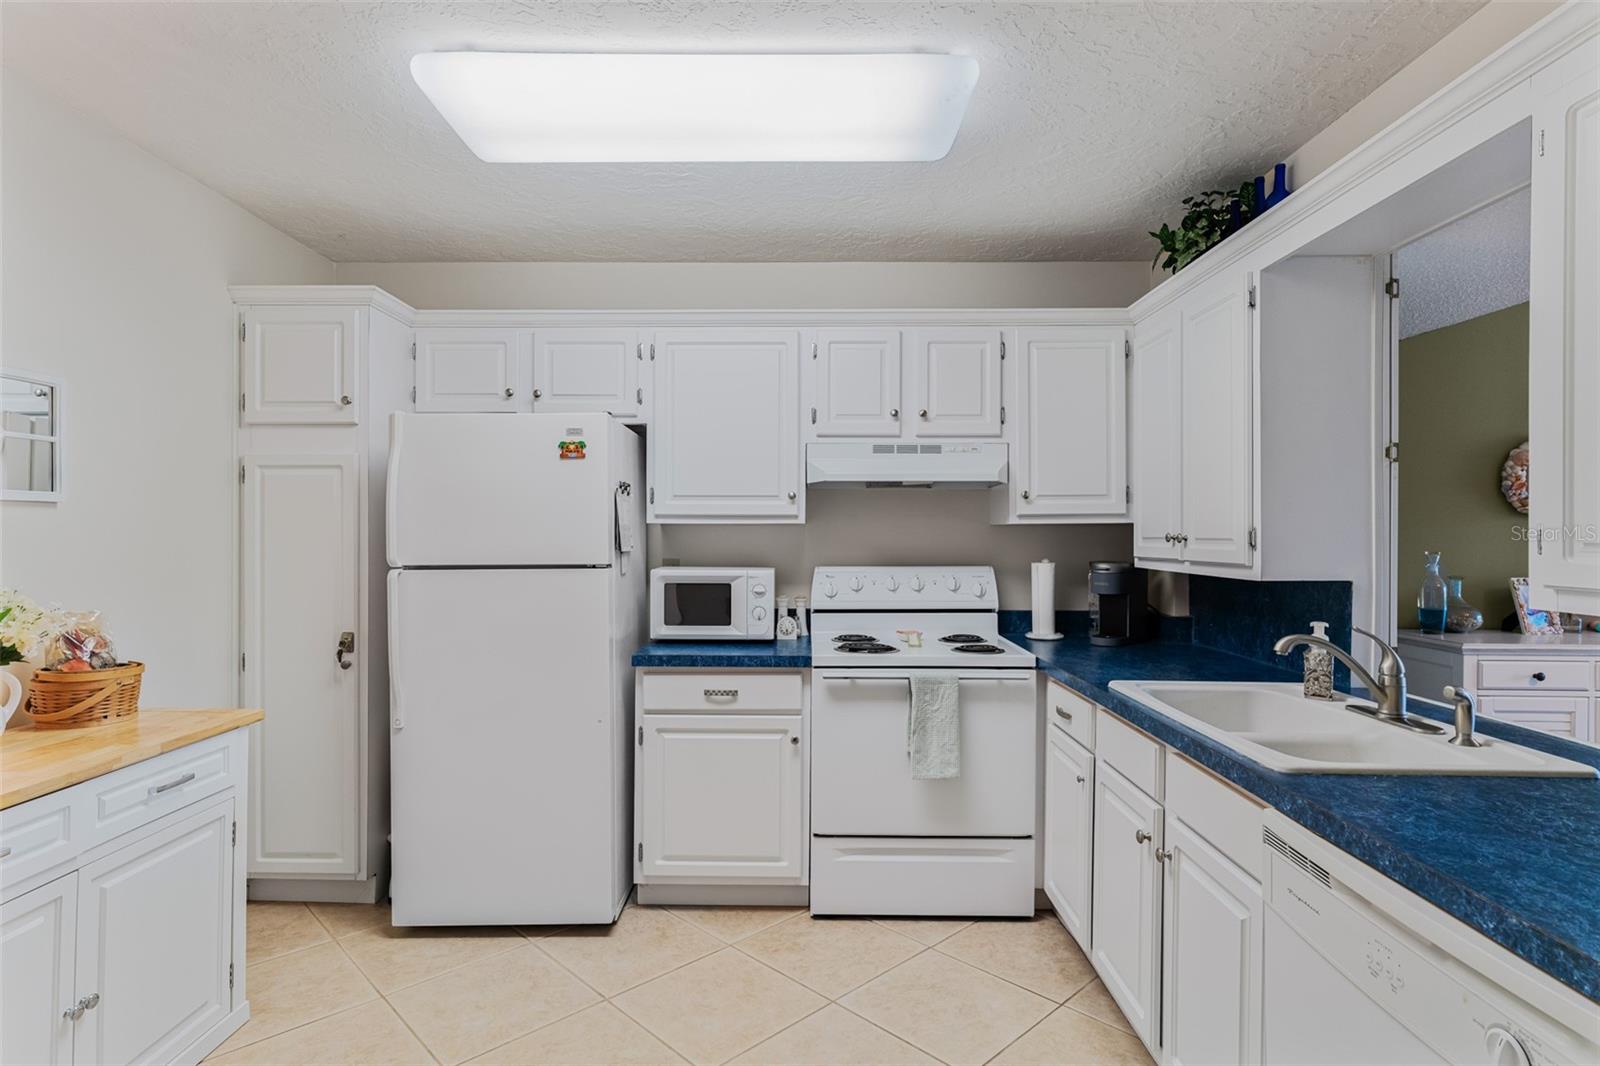 Very clean and bright kitchen with lots of cabinet and counter space